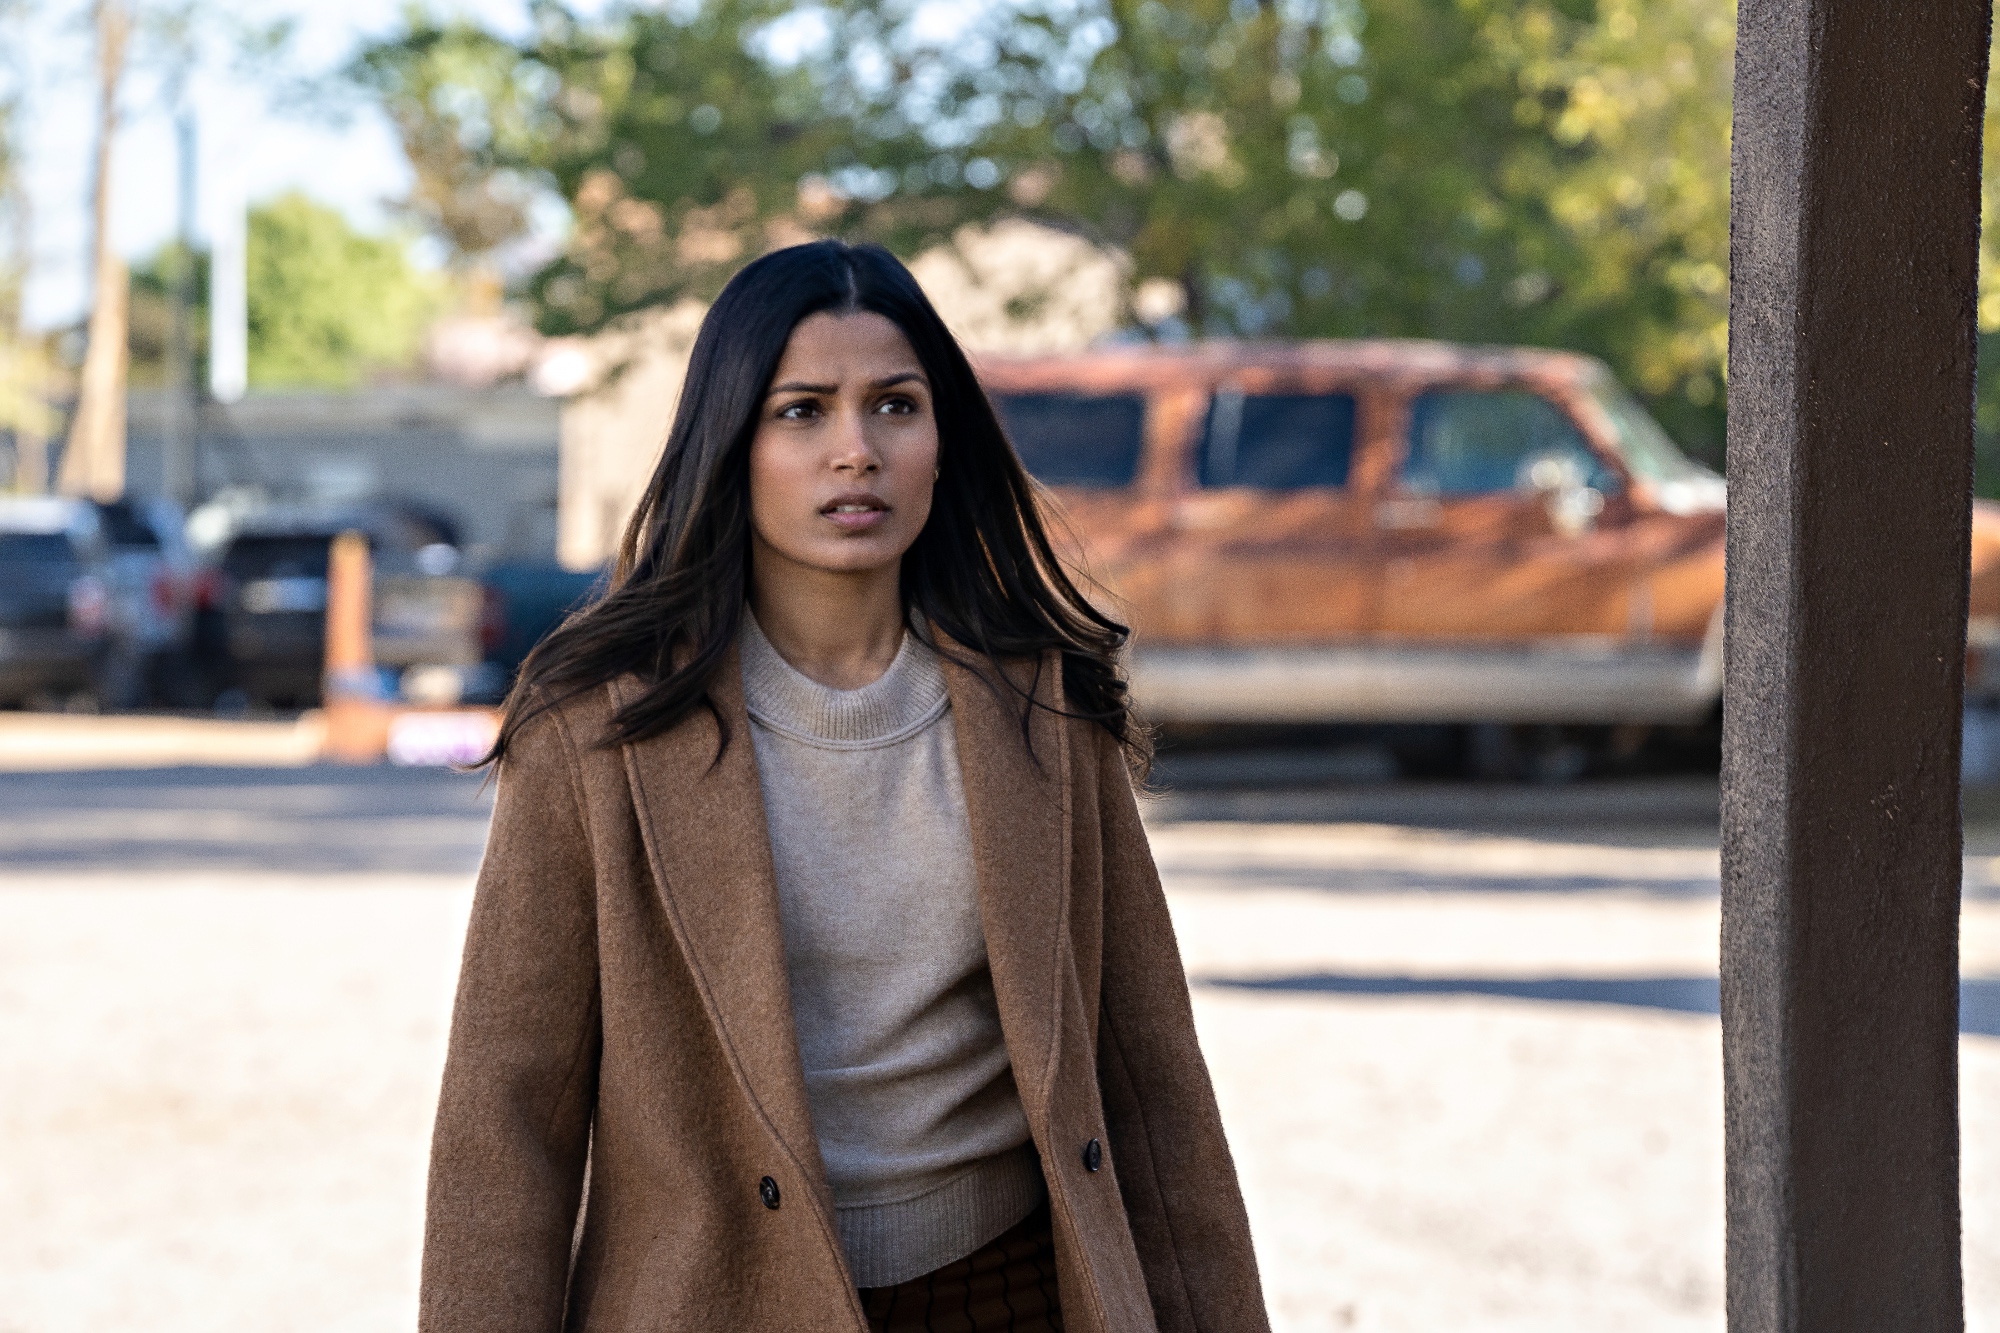 'Intrusion' star Freida Pinto as Meera in a brown coat investigating the mystery